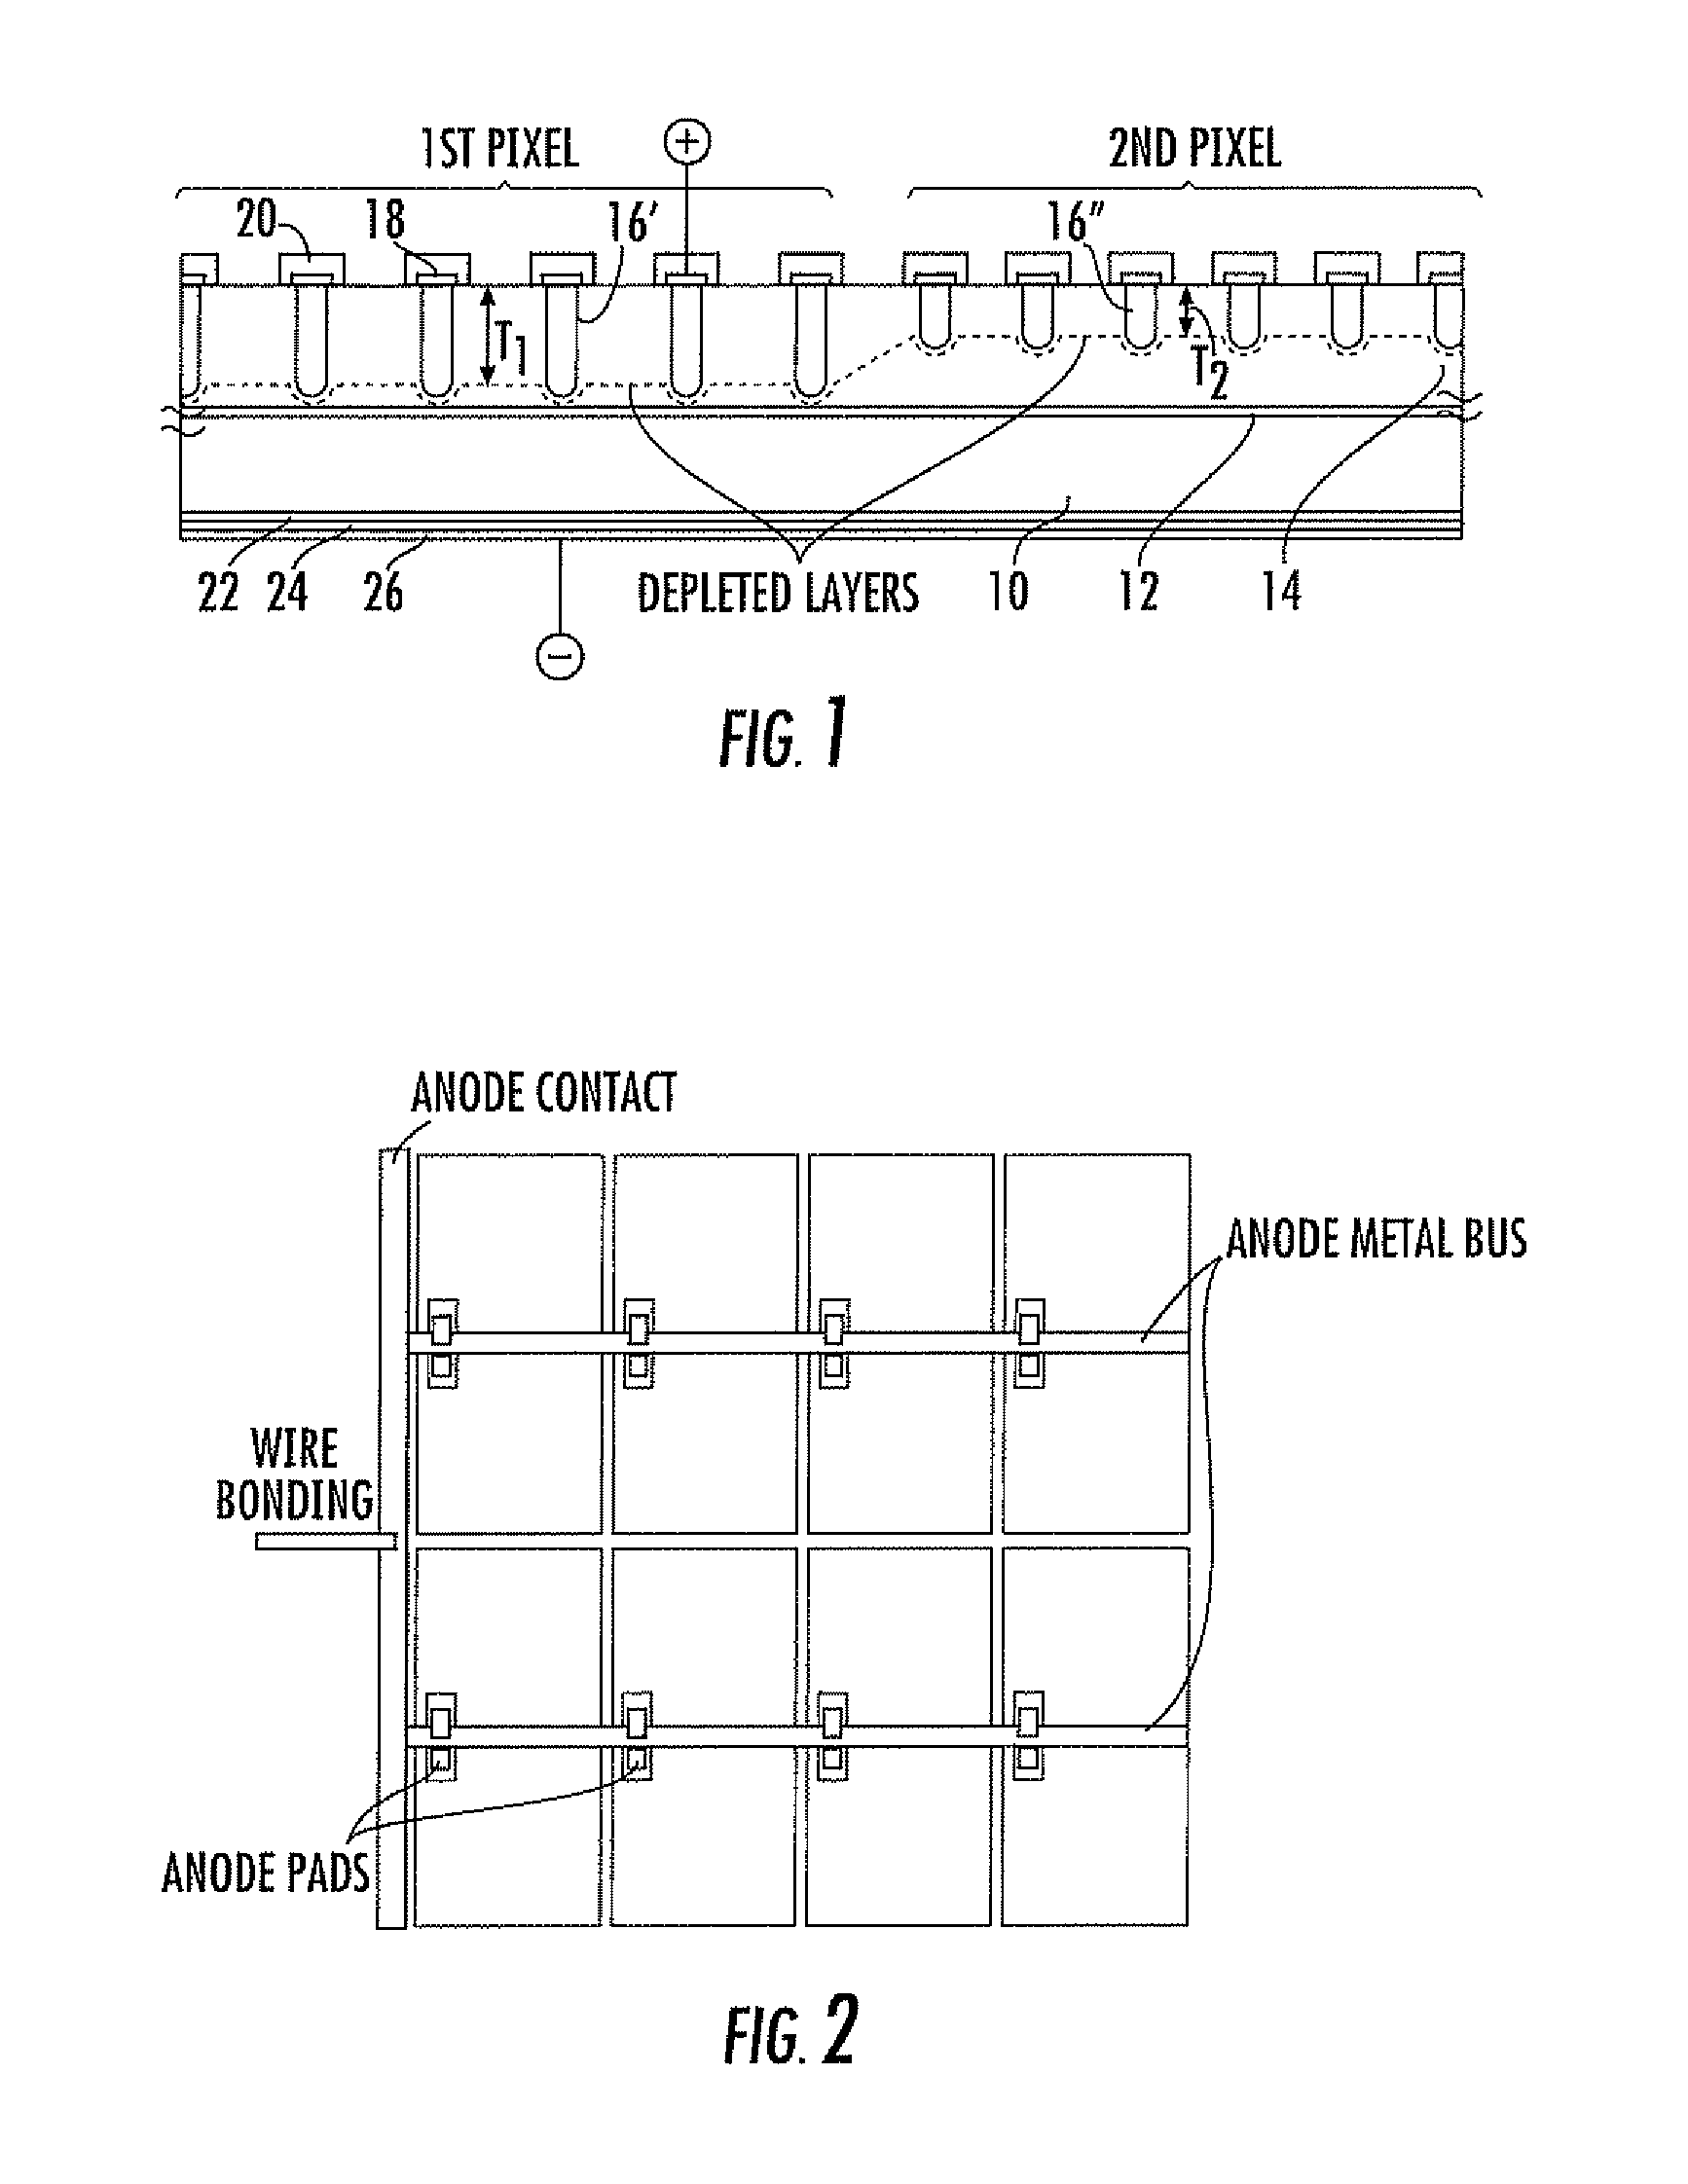 Multiplexed output two terminal photodiode array for imaging applications and related fabrication process